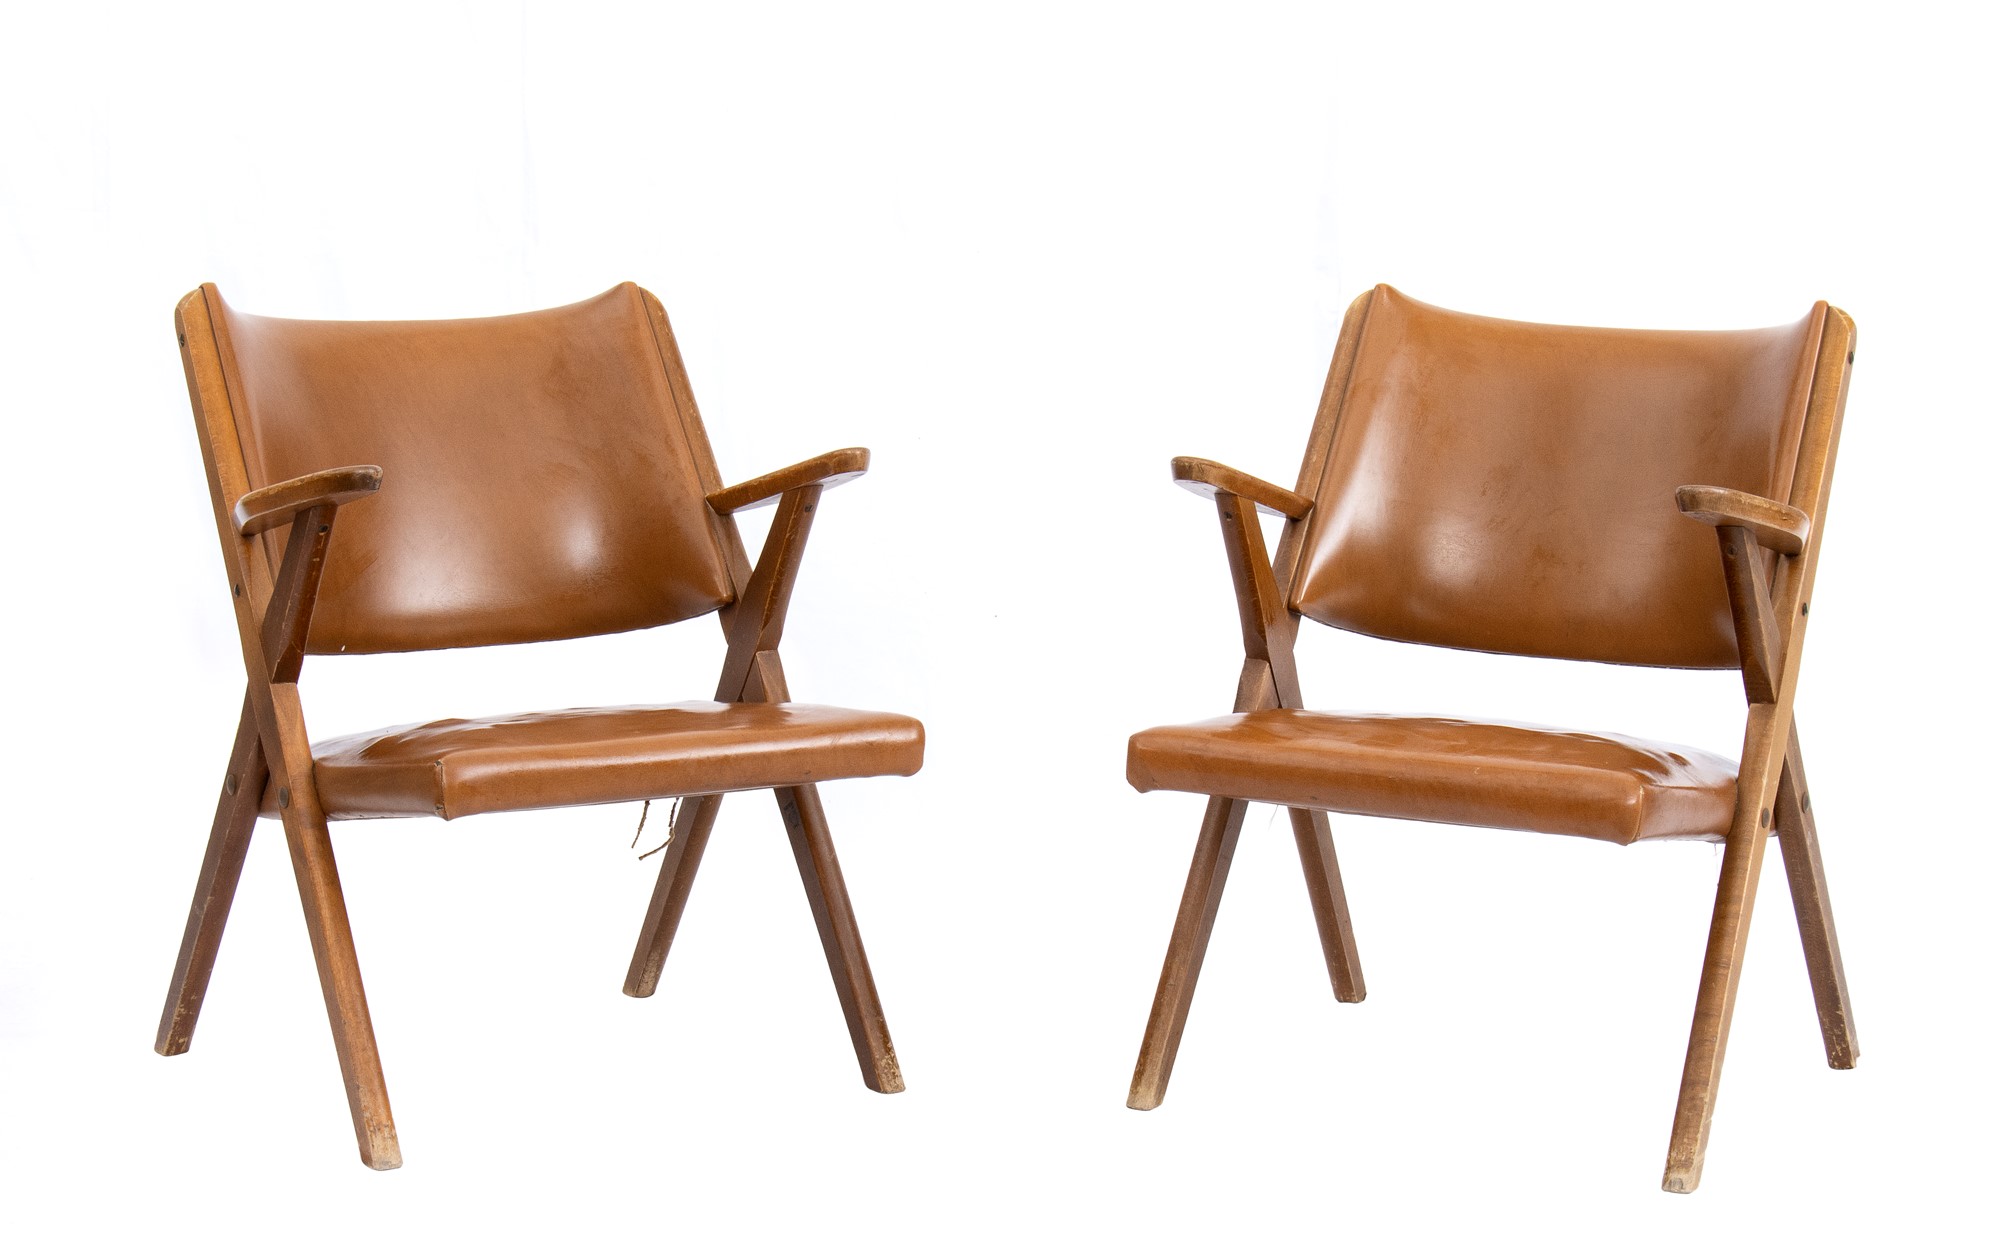 Dal Vera pair of armchairs with upholstered leather seats and backs - Image 2 of 17